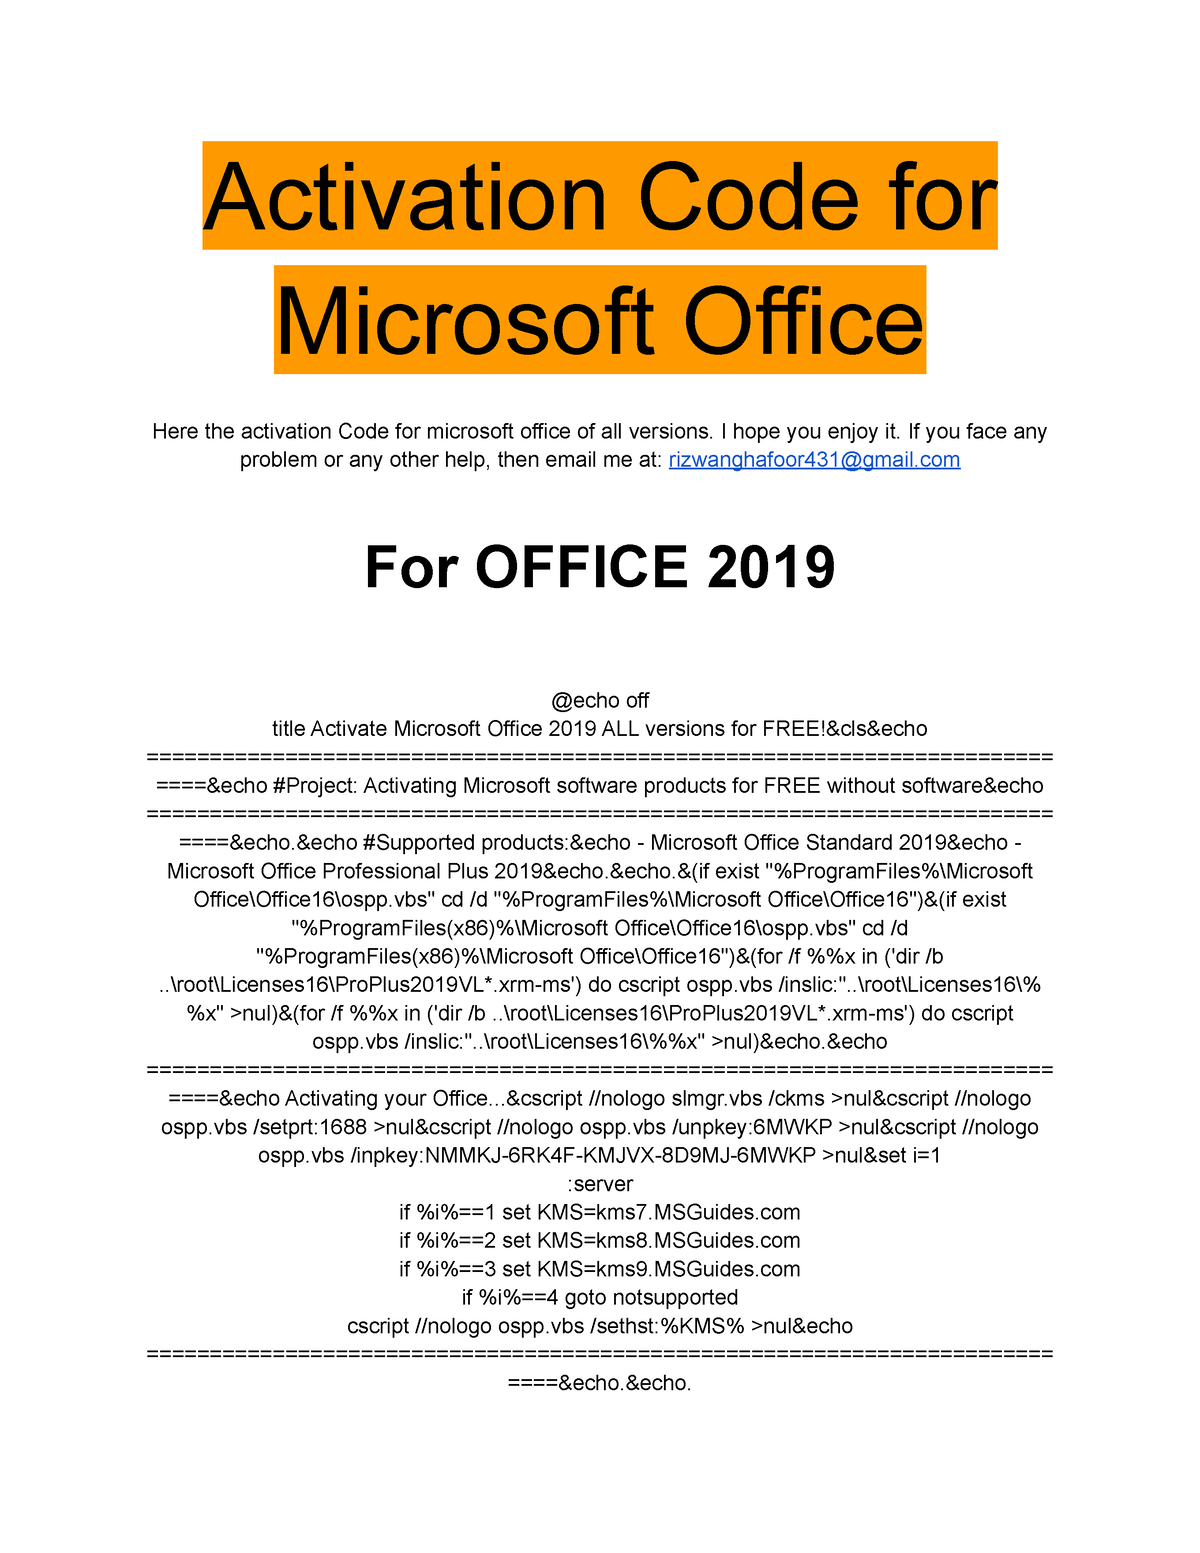 Activate Microsoft Office without any software - Activation Code for  Microsoft Office Here the - Studocu